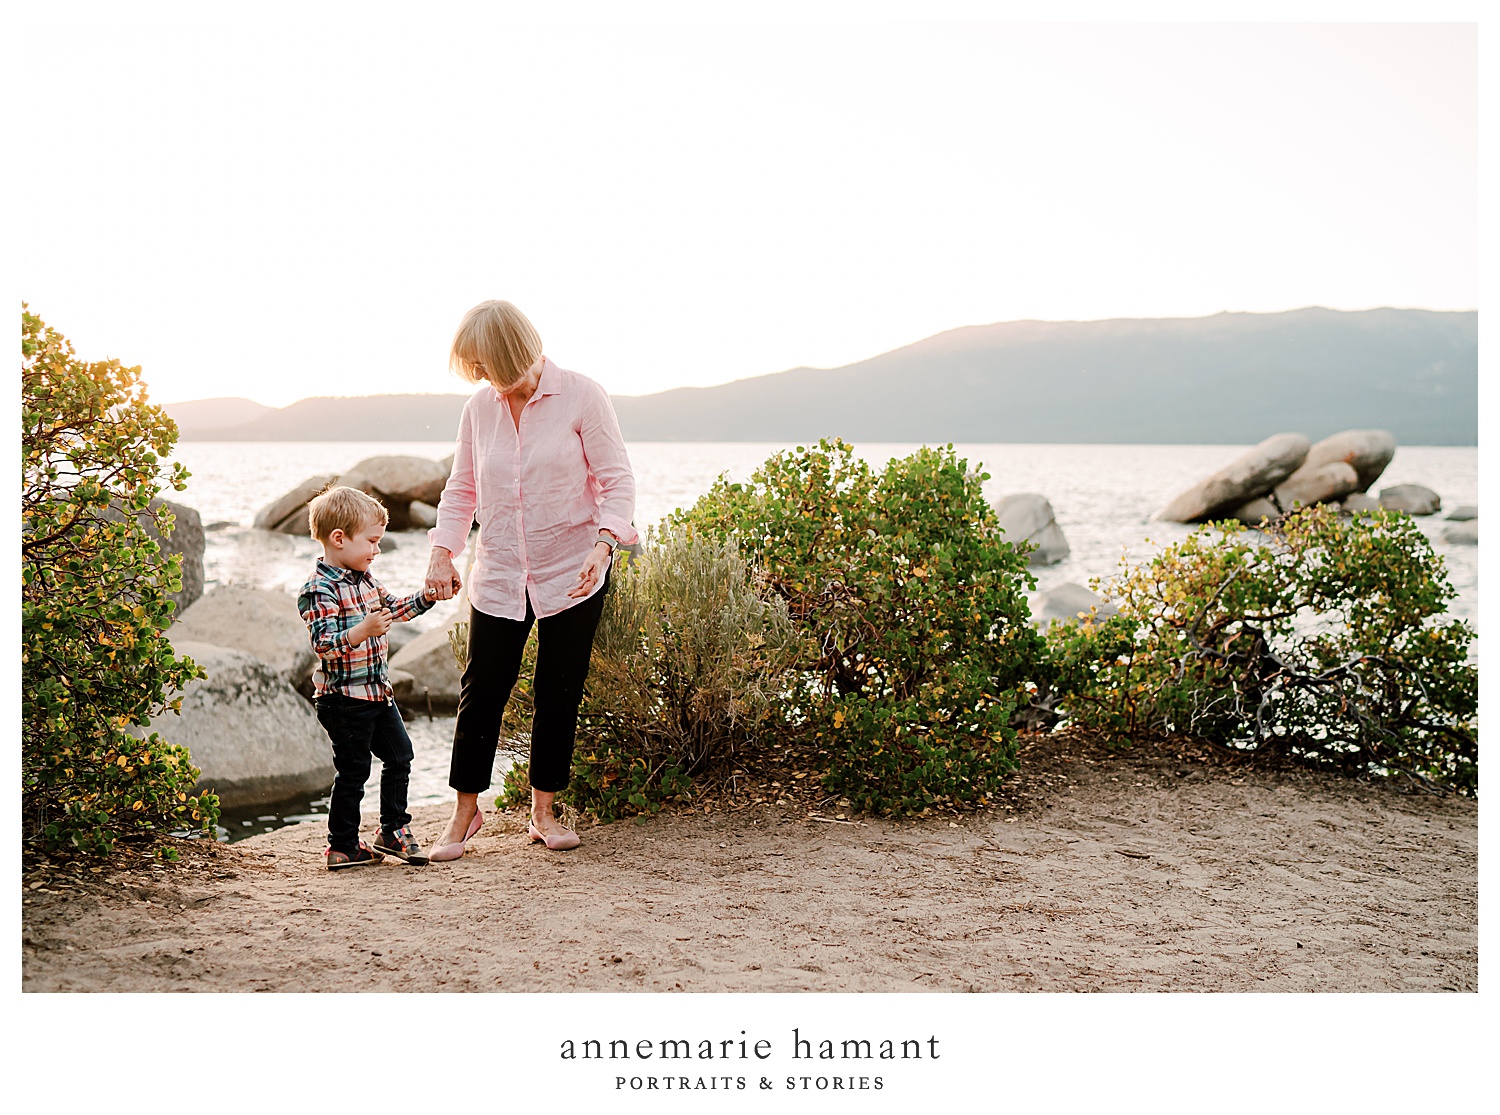  AnneMarie Hamant Portraits + Stories captures the loves of generations in her extended family sessions.  